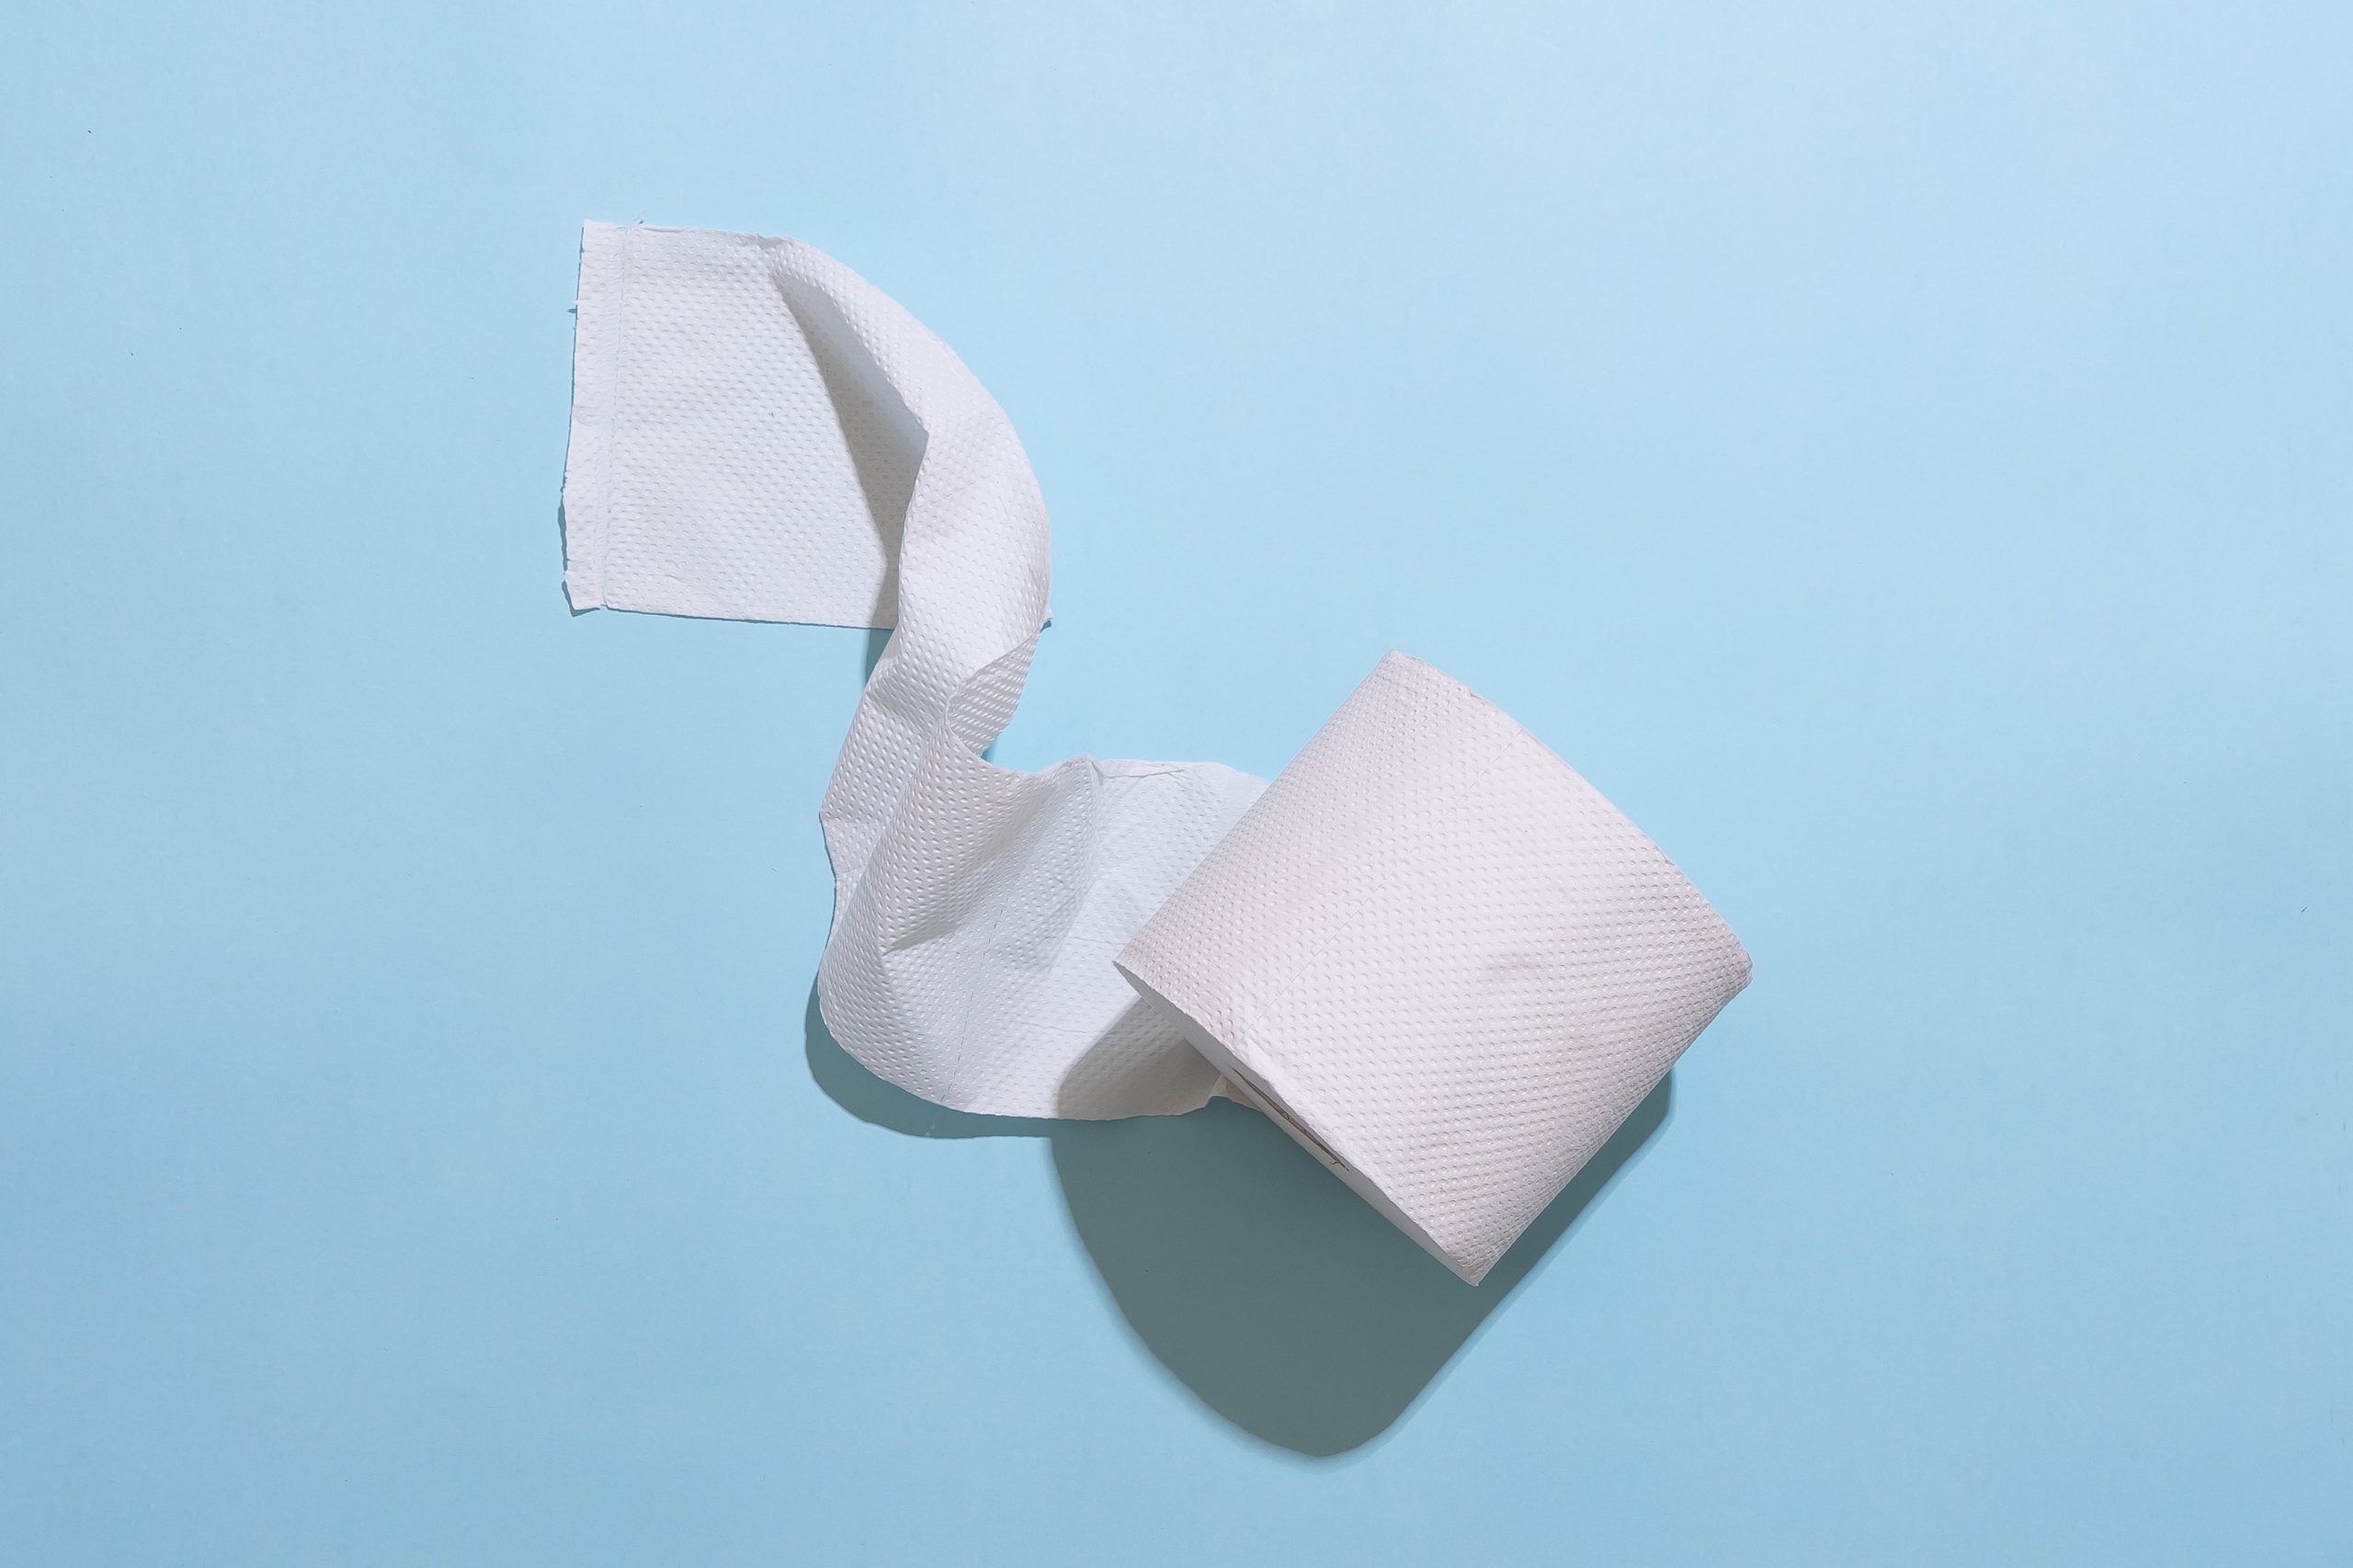 2021 Toilet Paper Rankings: The Best, Softest Tissue For Your Tush